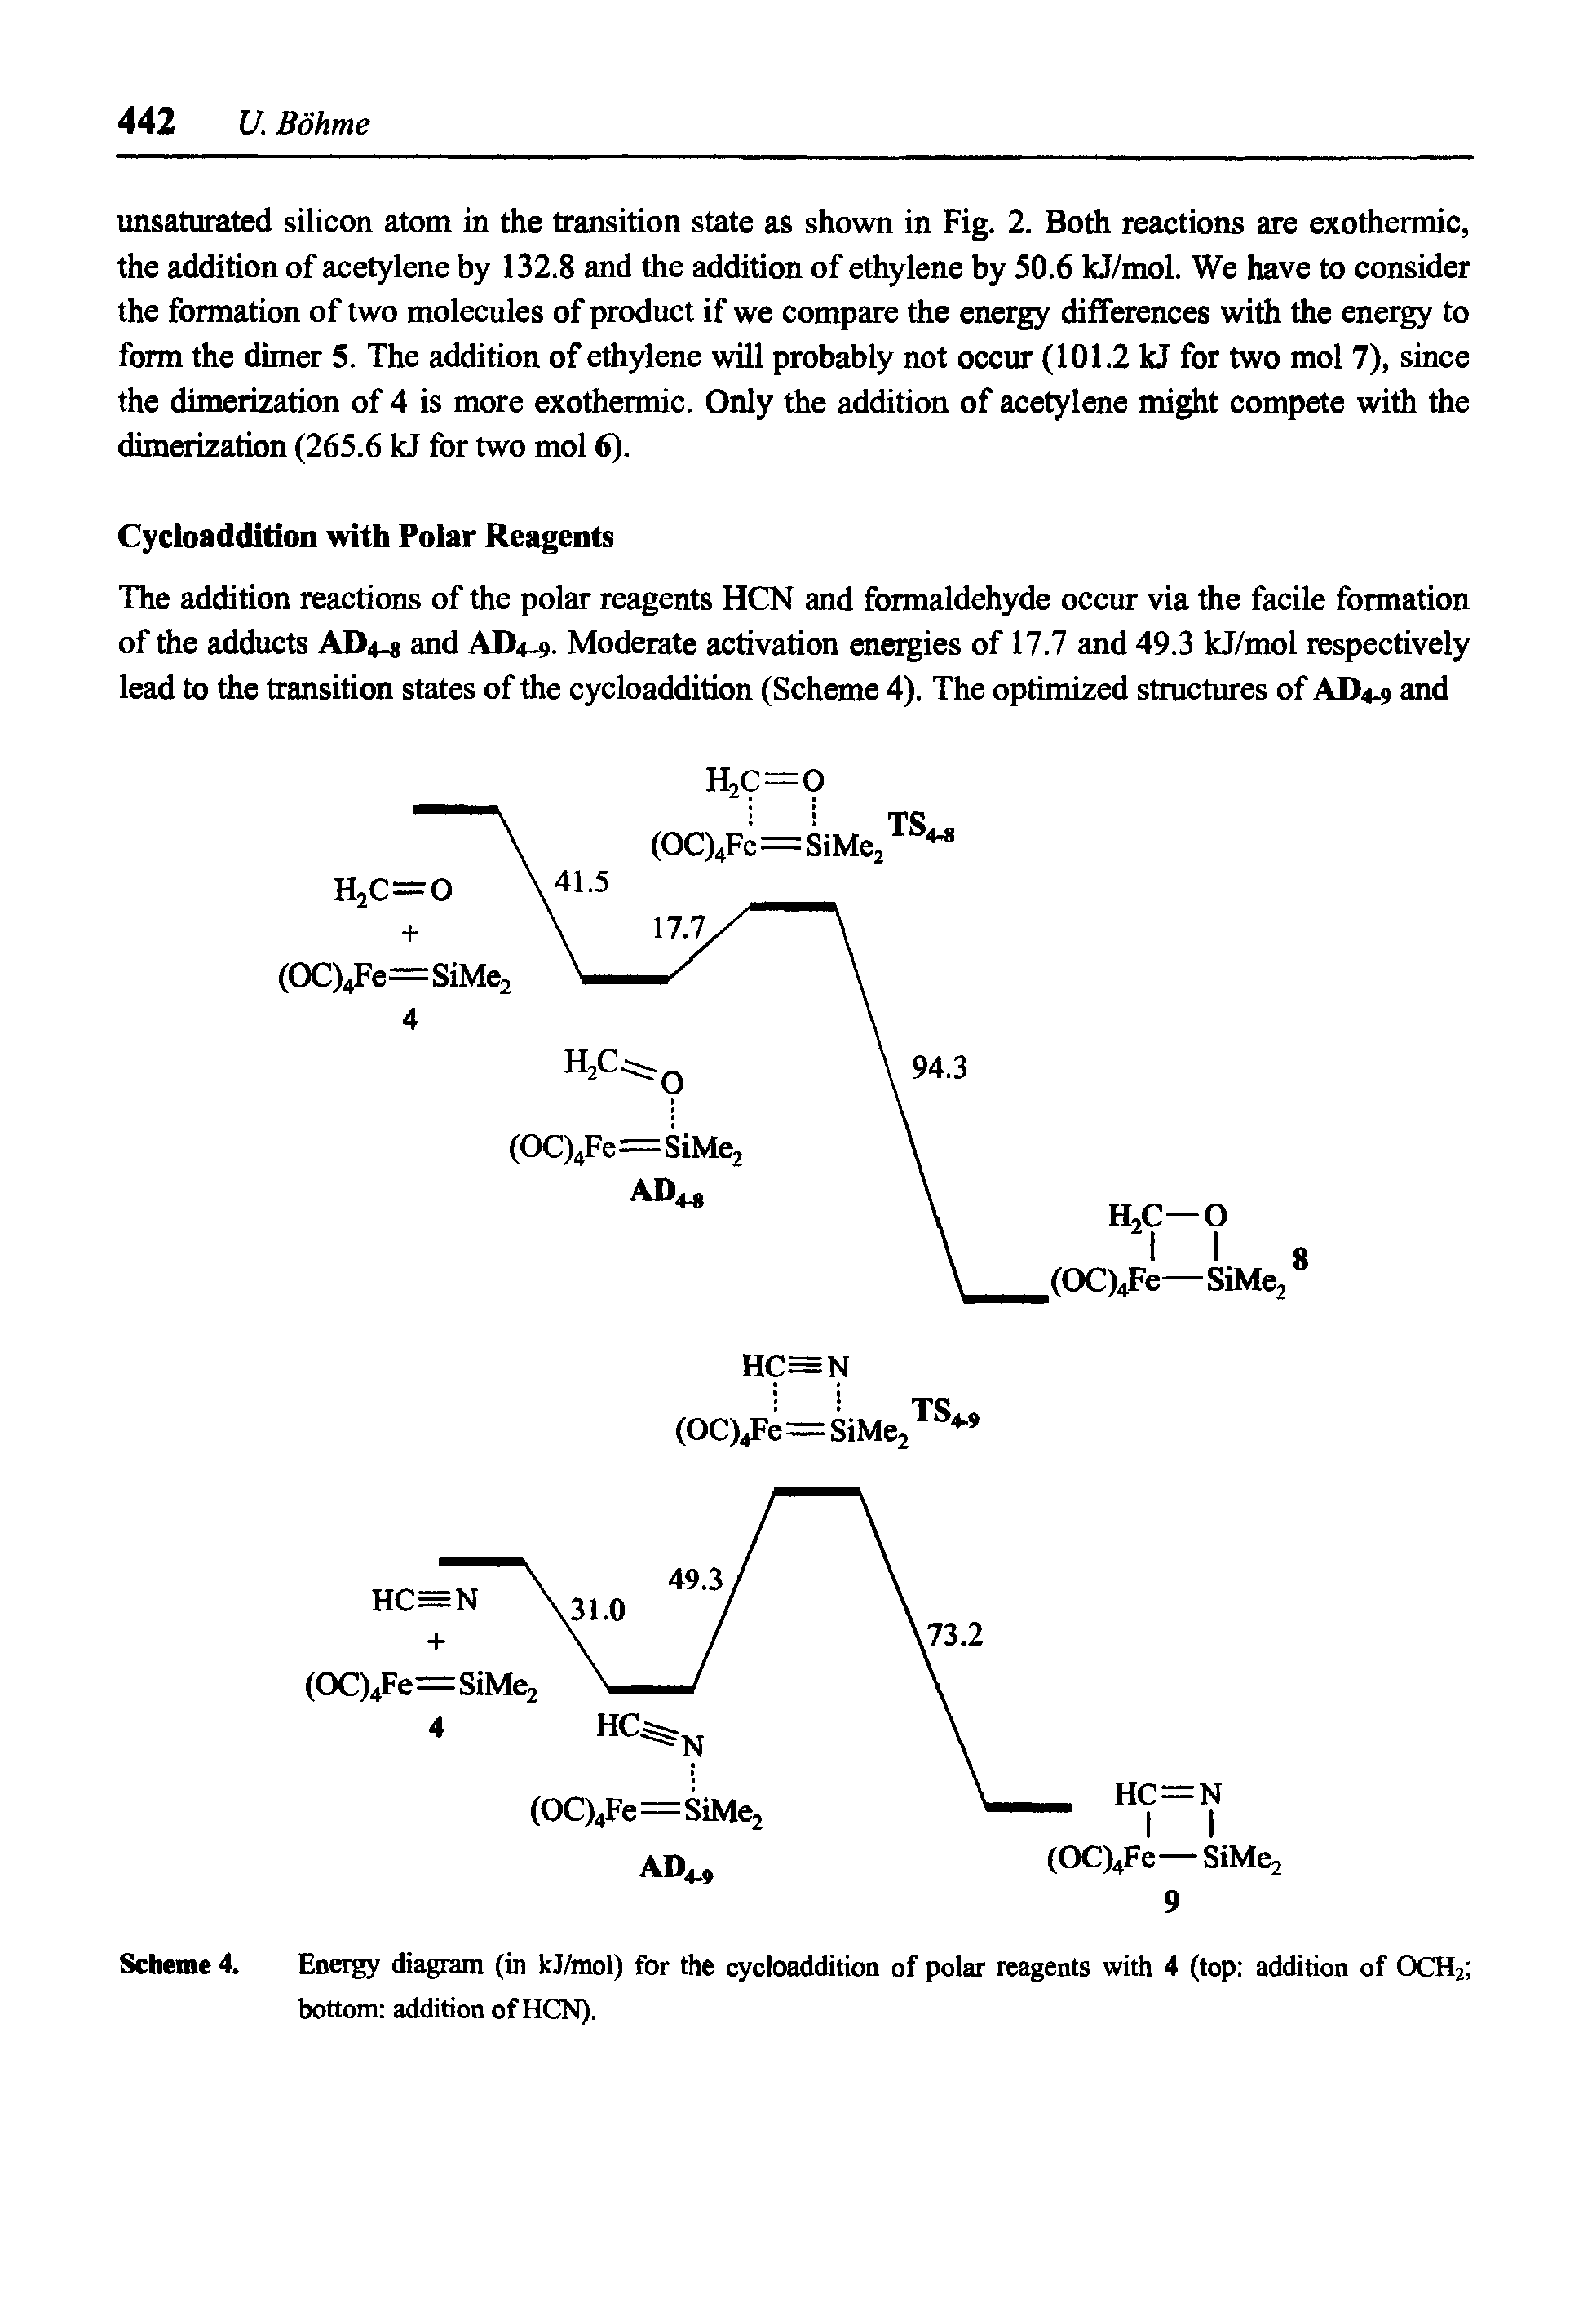 Scheme 4. Energy diagram (in kJ/mol) for the cycloaddition of polar reagents with 4 (top addition of OCH2 bottom addition of HCN).